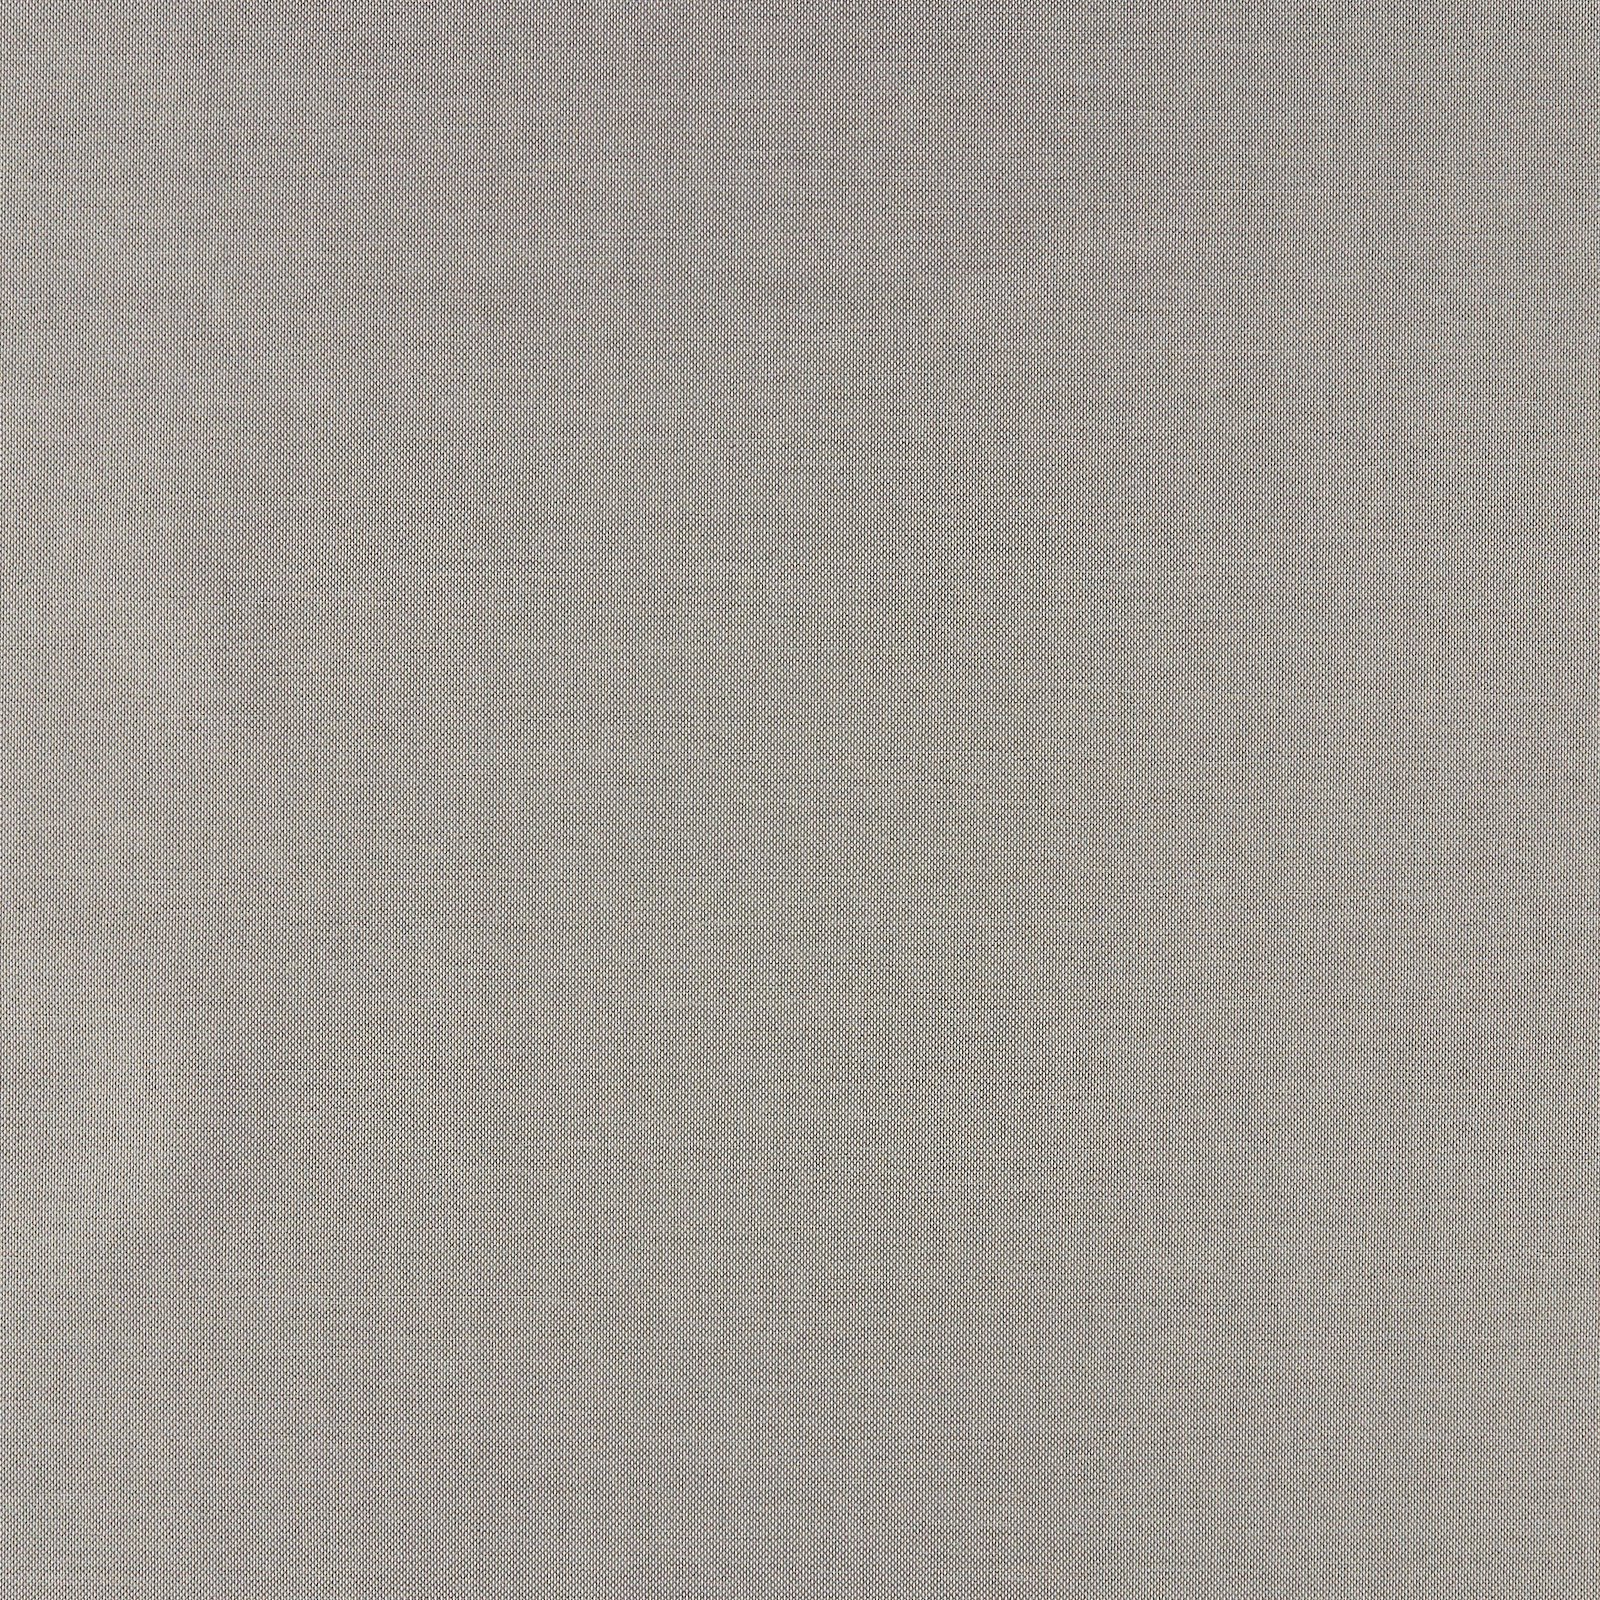 Upholstery fabric light grey 822231_pack_sp